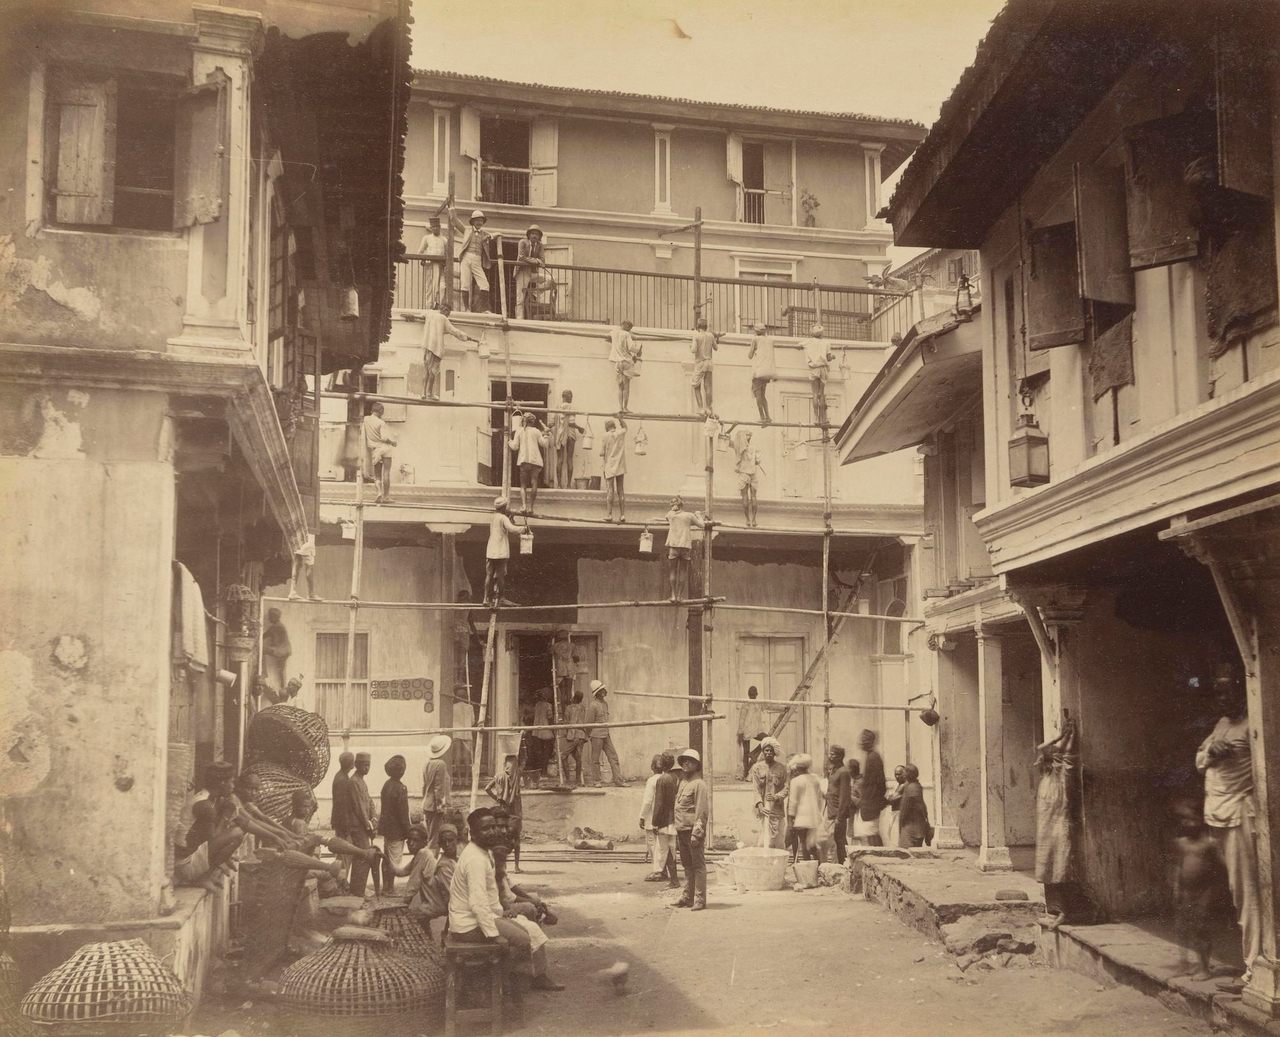 Workers clean a house in a neighborhood affected by the 1896 bubonic plague.